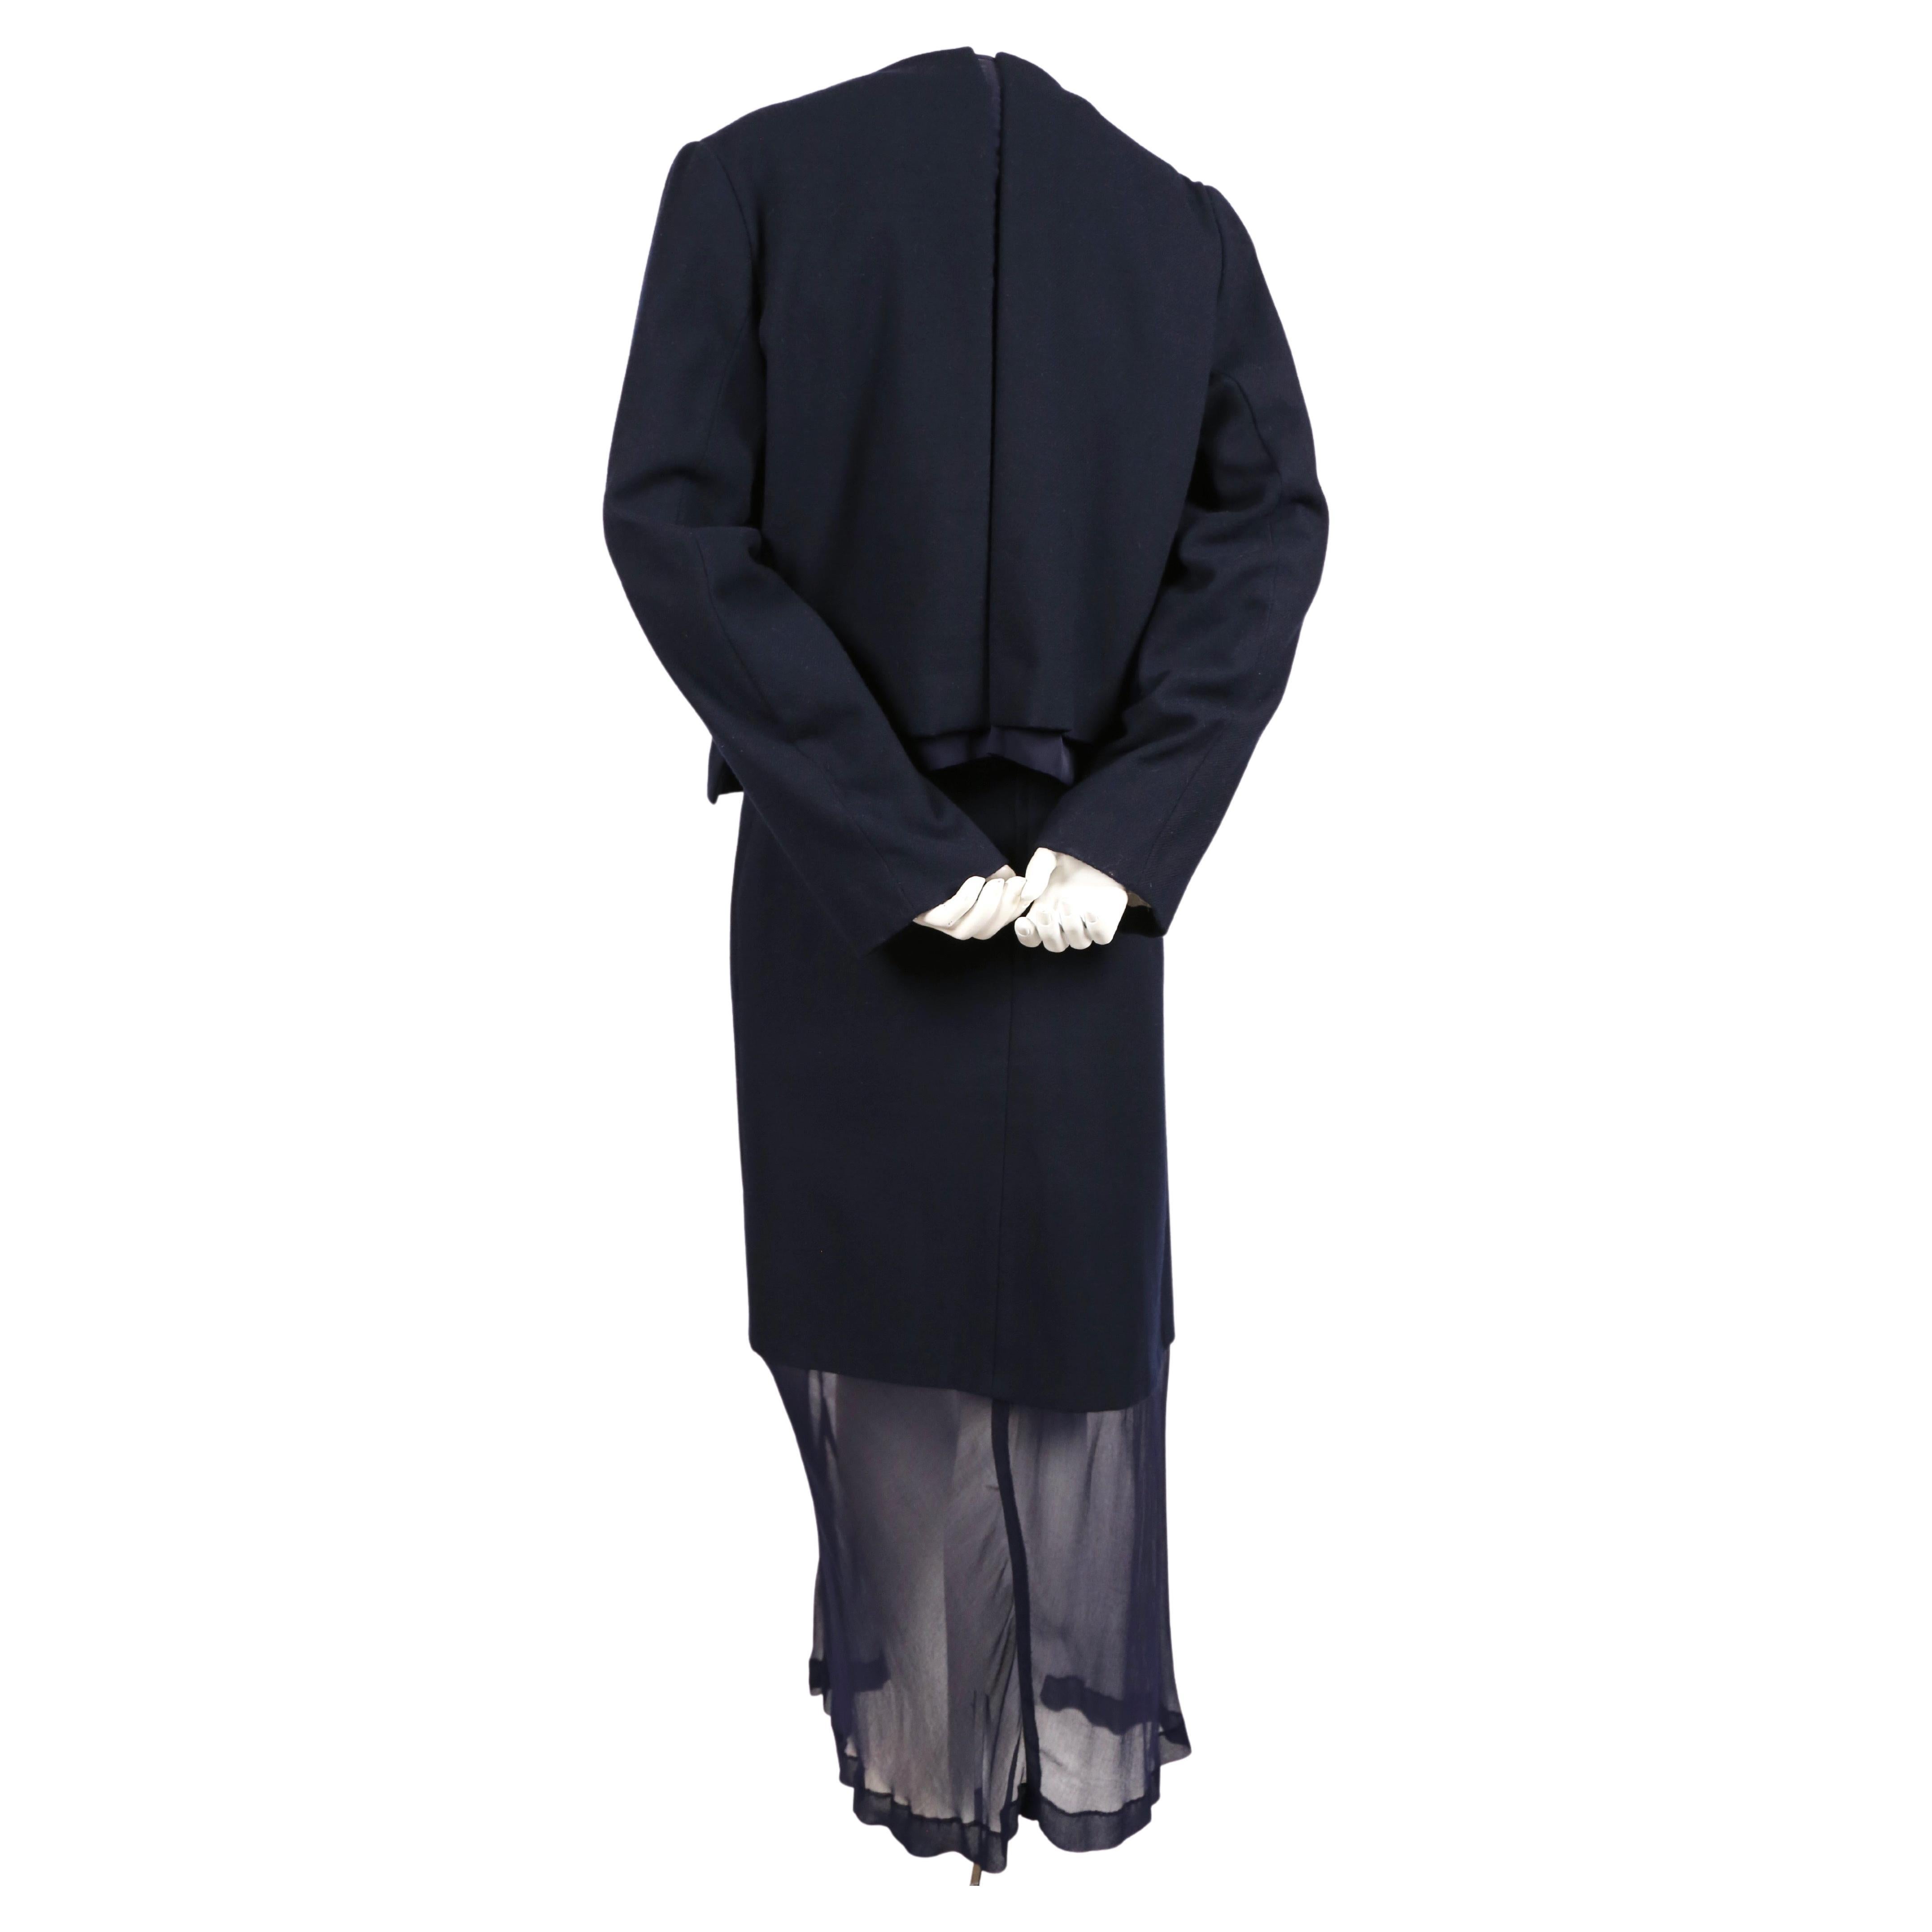 1997 COMME DES GARCONS navy blue wool ensemble with sheer panels For Sale 1